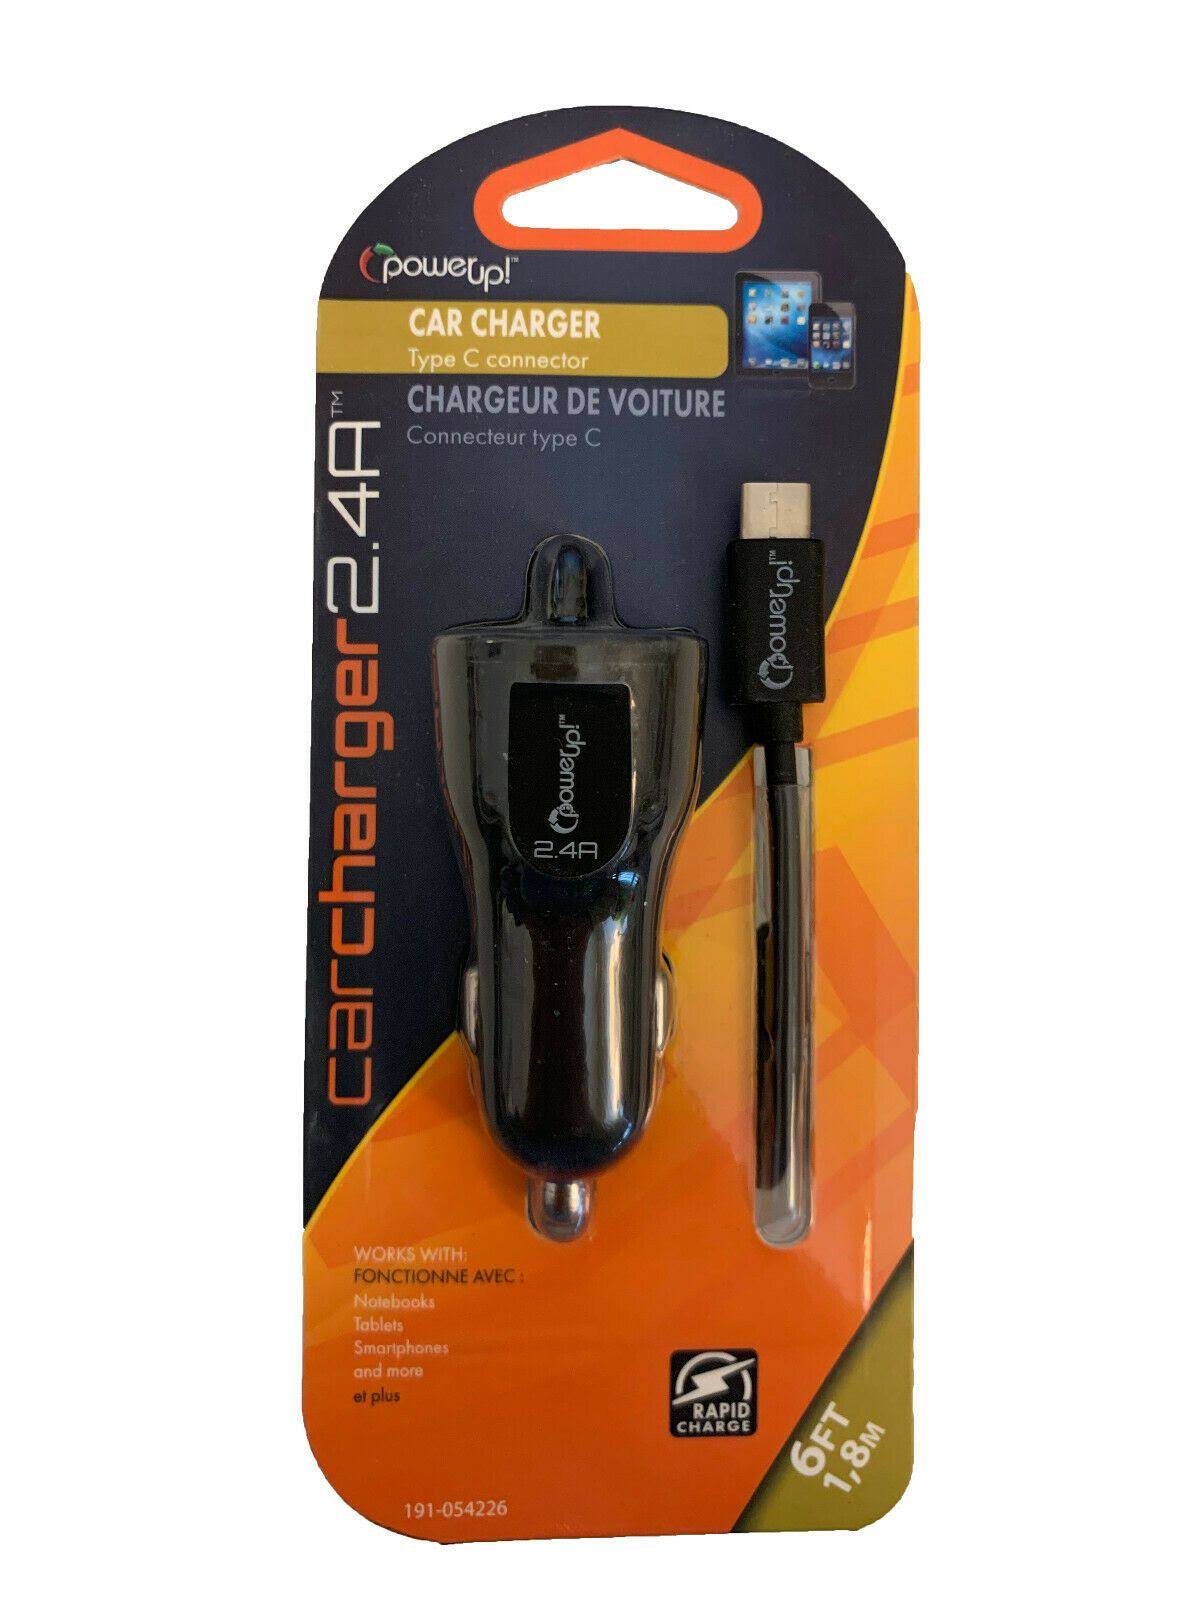 PowerUp! Car Charger 2.4a with 6ft. Type C Connector Cord (Black)